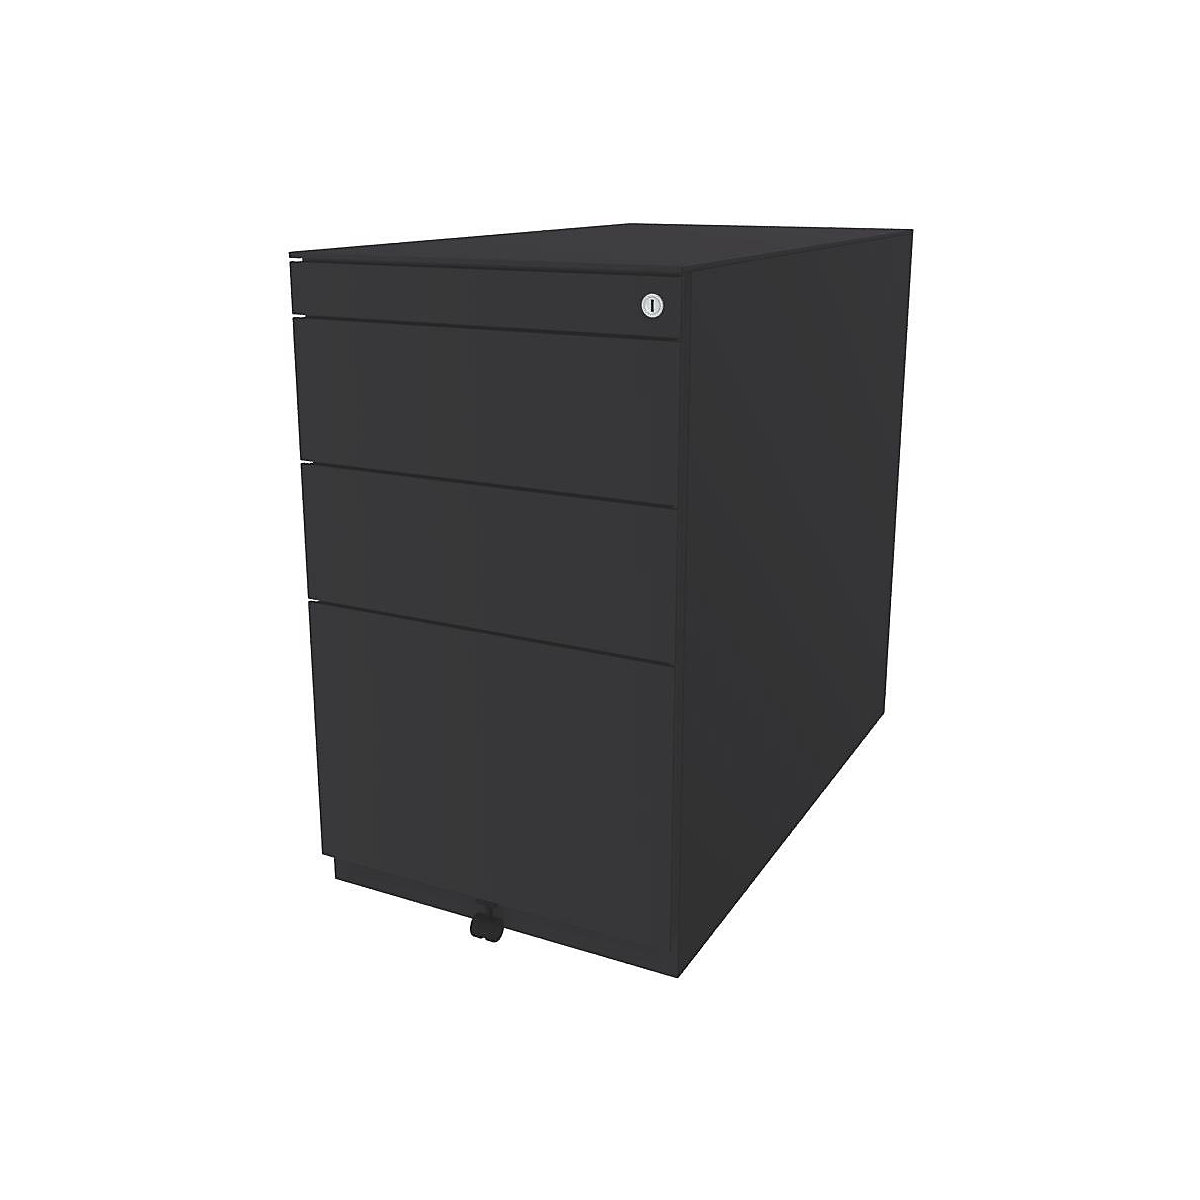 Note™ fixed pedestal, with 2 universal drawers, 1 suspension file drawer – BISLEY, with top, depth 775 mm, charcoal-6